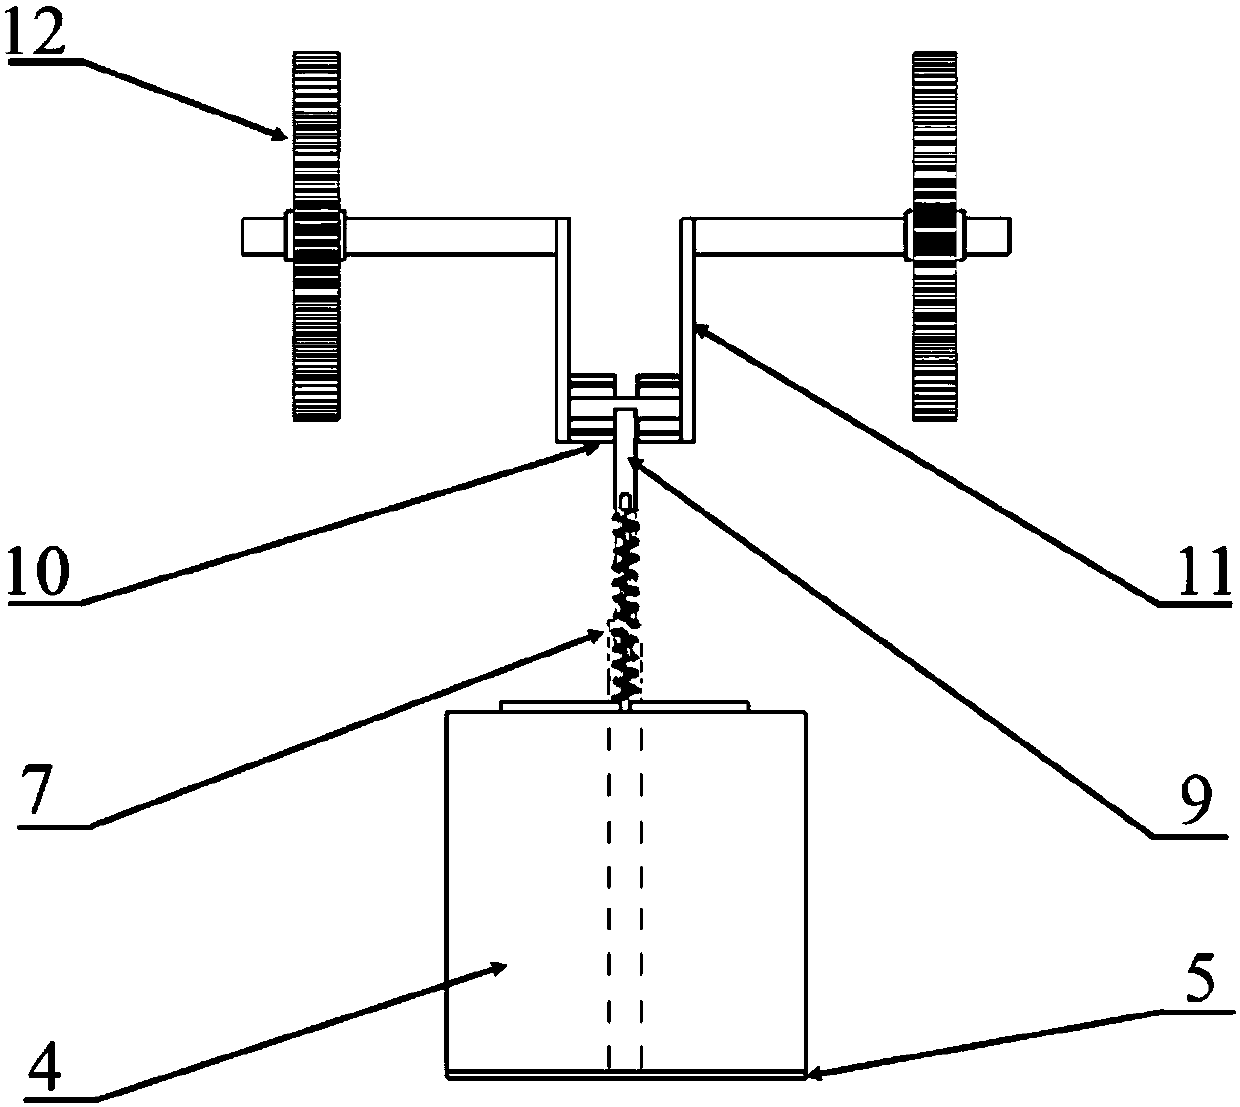 A continuous ramming source device